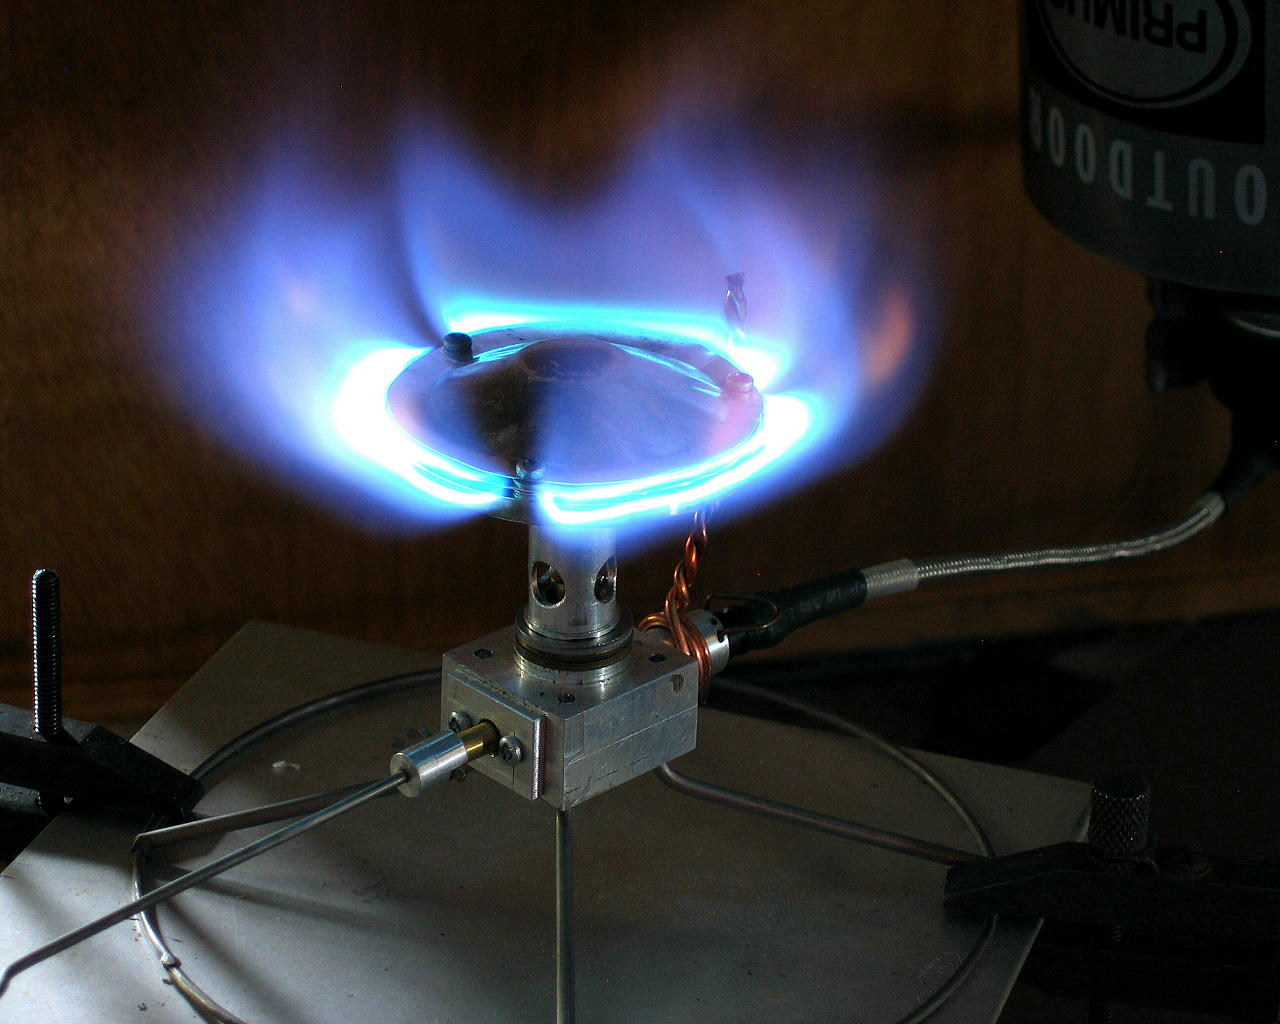 A medium shot of a stove burner head glowing brightly with blue flame